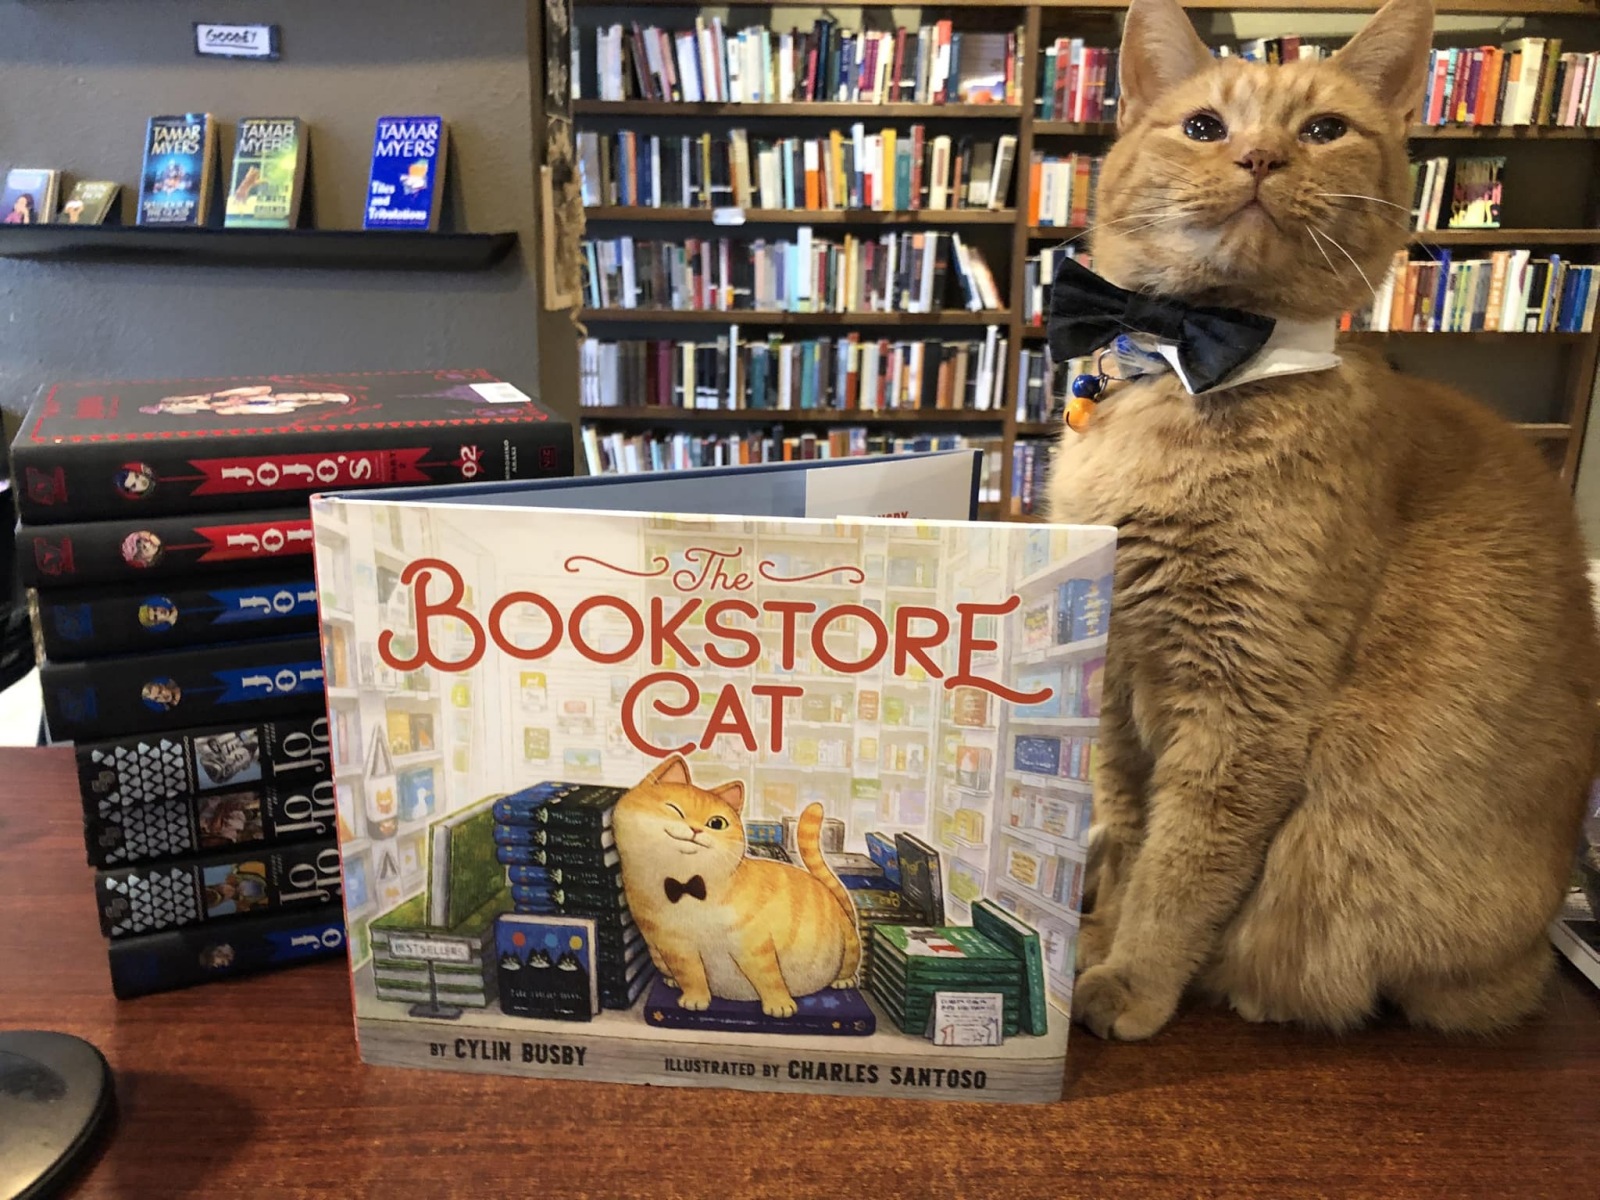 Googey the cat, wearing a black bowtie, sits next to a book titled "Bookstore Cat."